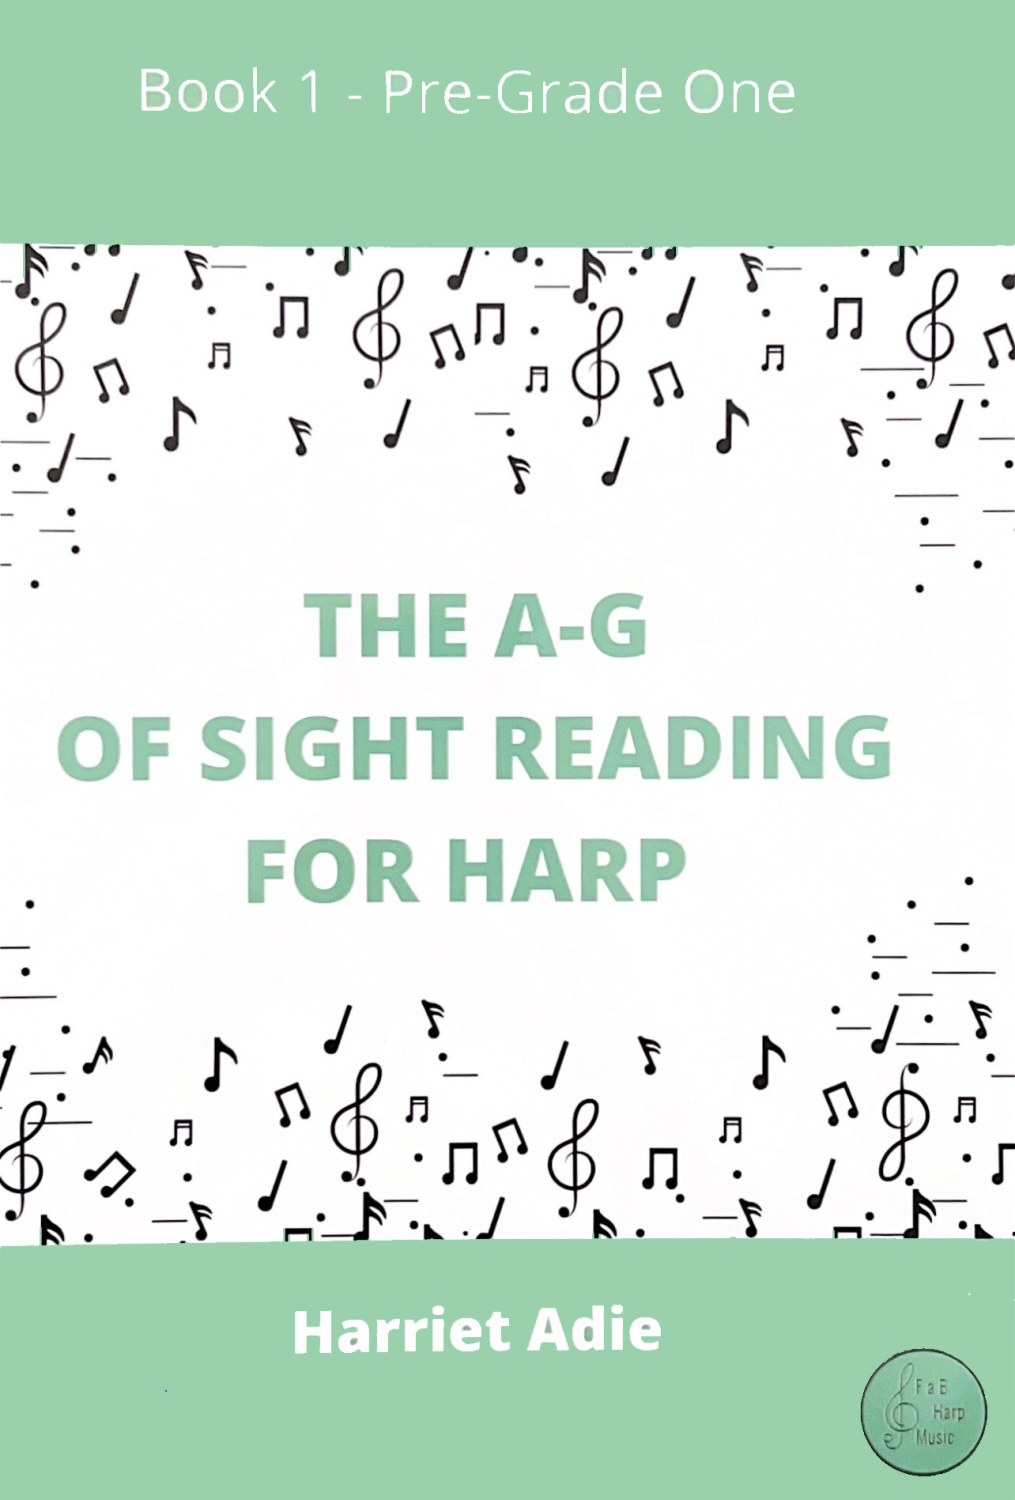 The A-G Of Sight Reading for Harp Book 1 Pre-Grade One - Harriet Adie